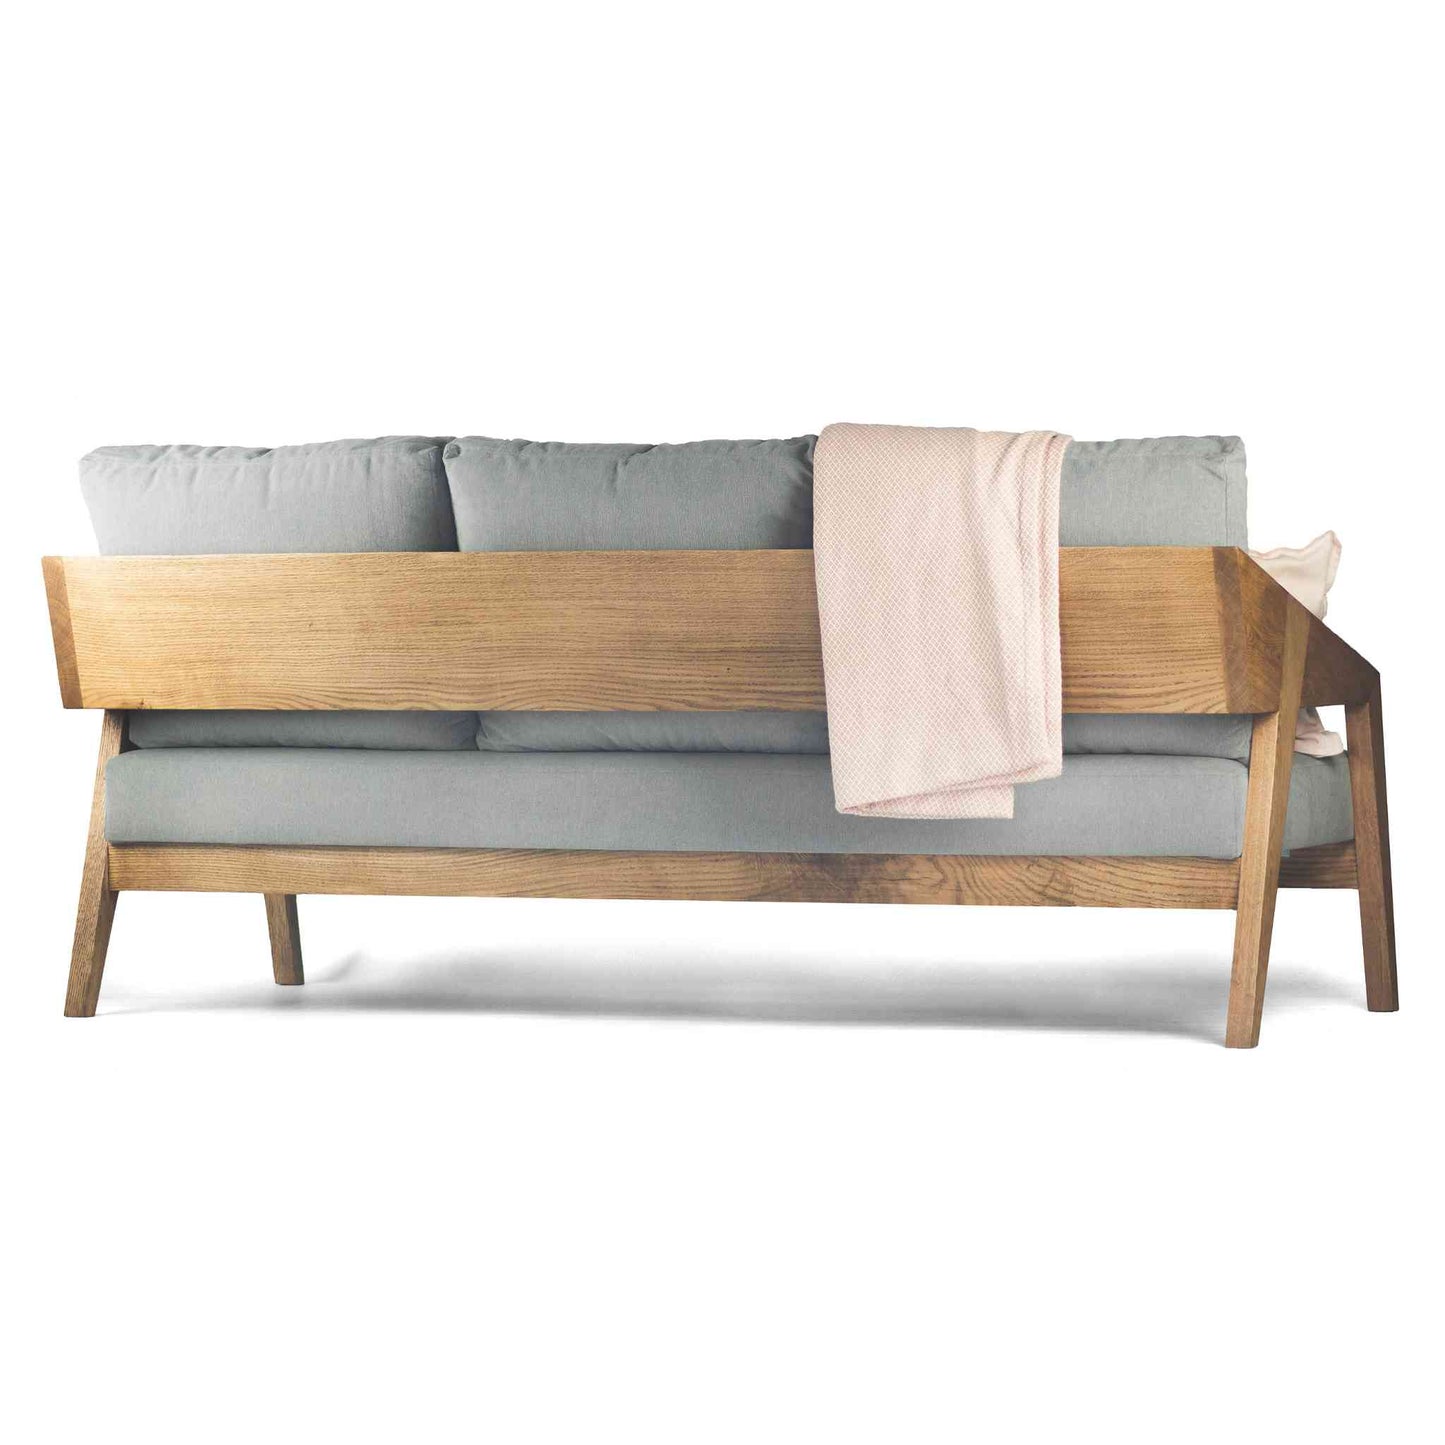 Piz Gloria solid oak wood sofa with high quality fabric upholstery in ash gray color - back view